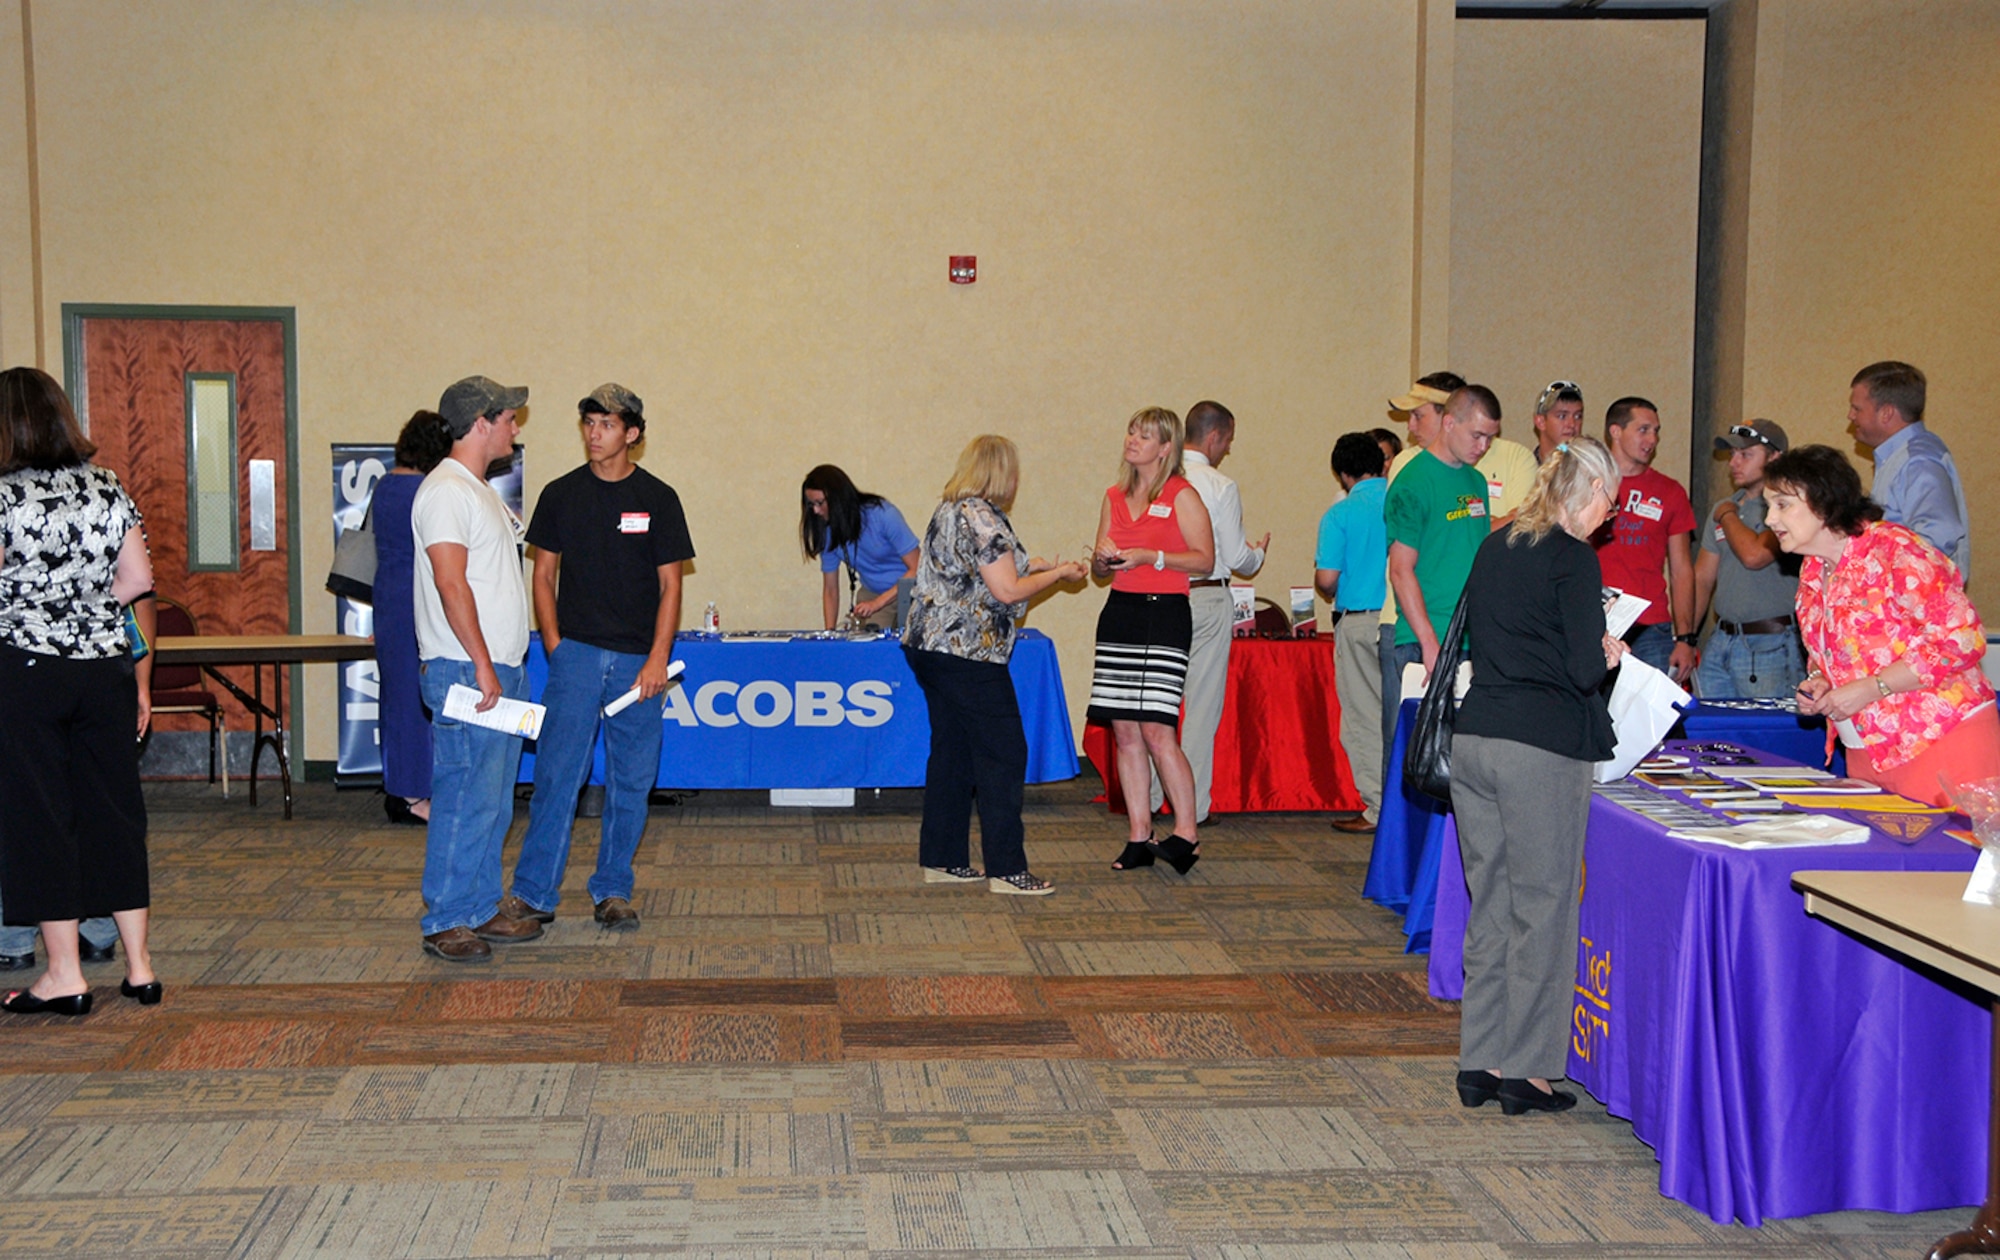 Twenty exhibitors had the chance to talk with about 150 people seeking work during a job assistance fair sponsored by Arnold Community Council and Tennessee Senator Bowling.
